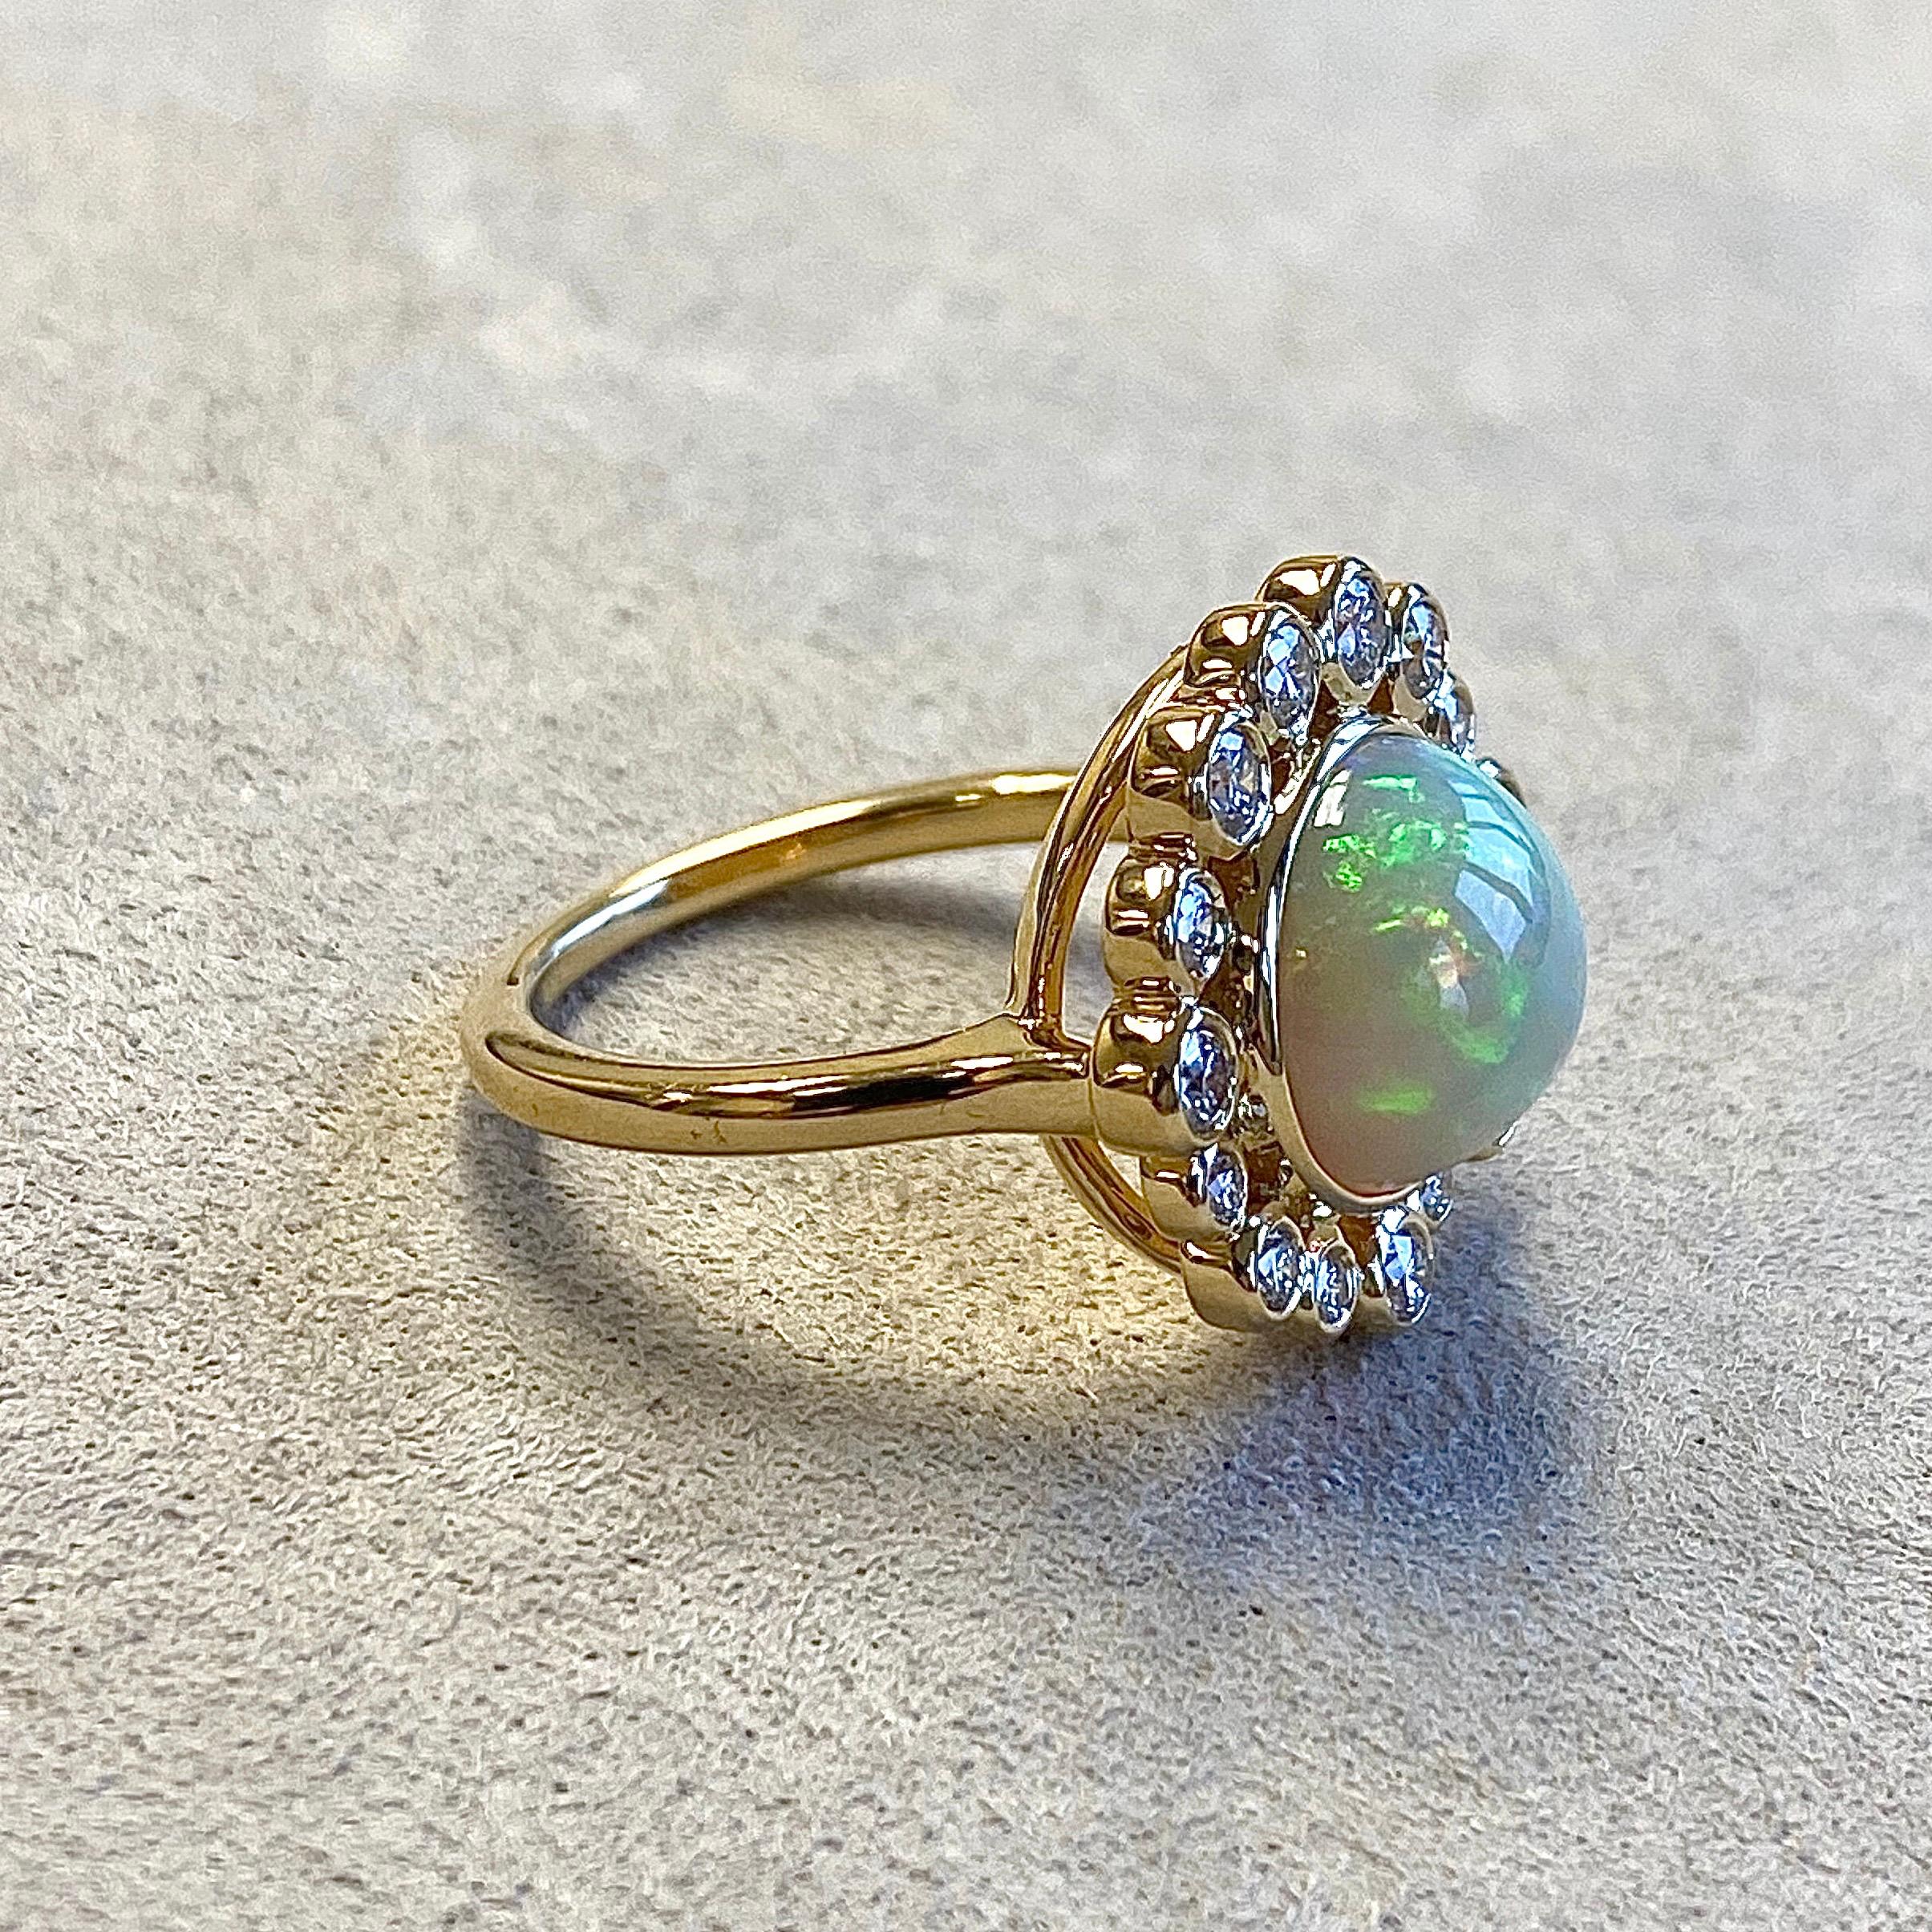 Created in 18 karat yellow gold
Ethiopian Opal 3.15 carats approx.
Diamonds 0.50 carat approx.
Ring size US 6.5, can be sized
One of a kind

About the Designers ~ Dharmesh & Namrata

Drawing inspiration from little things, Dharmesh & Namrata Kothari